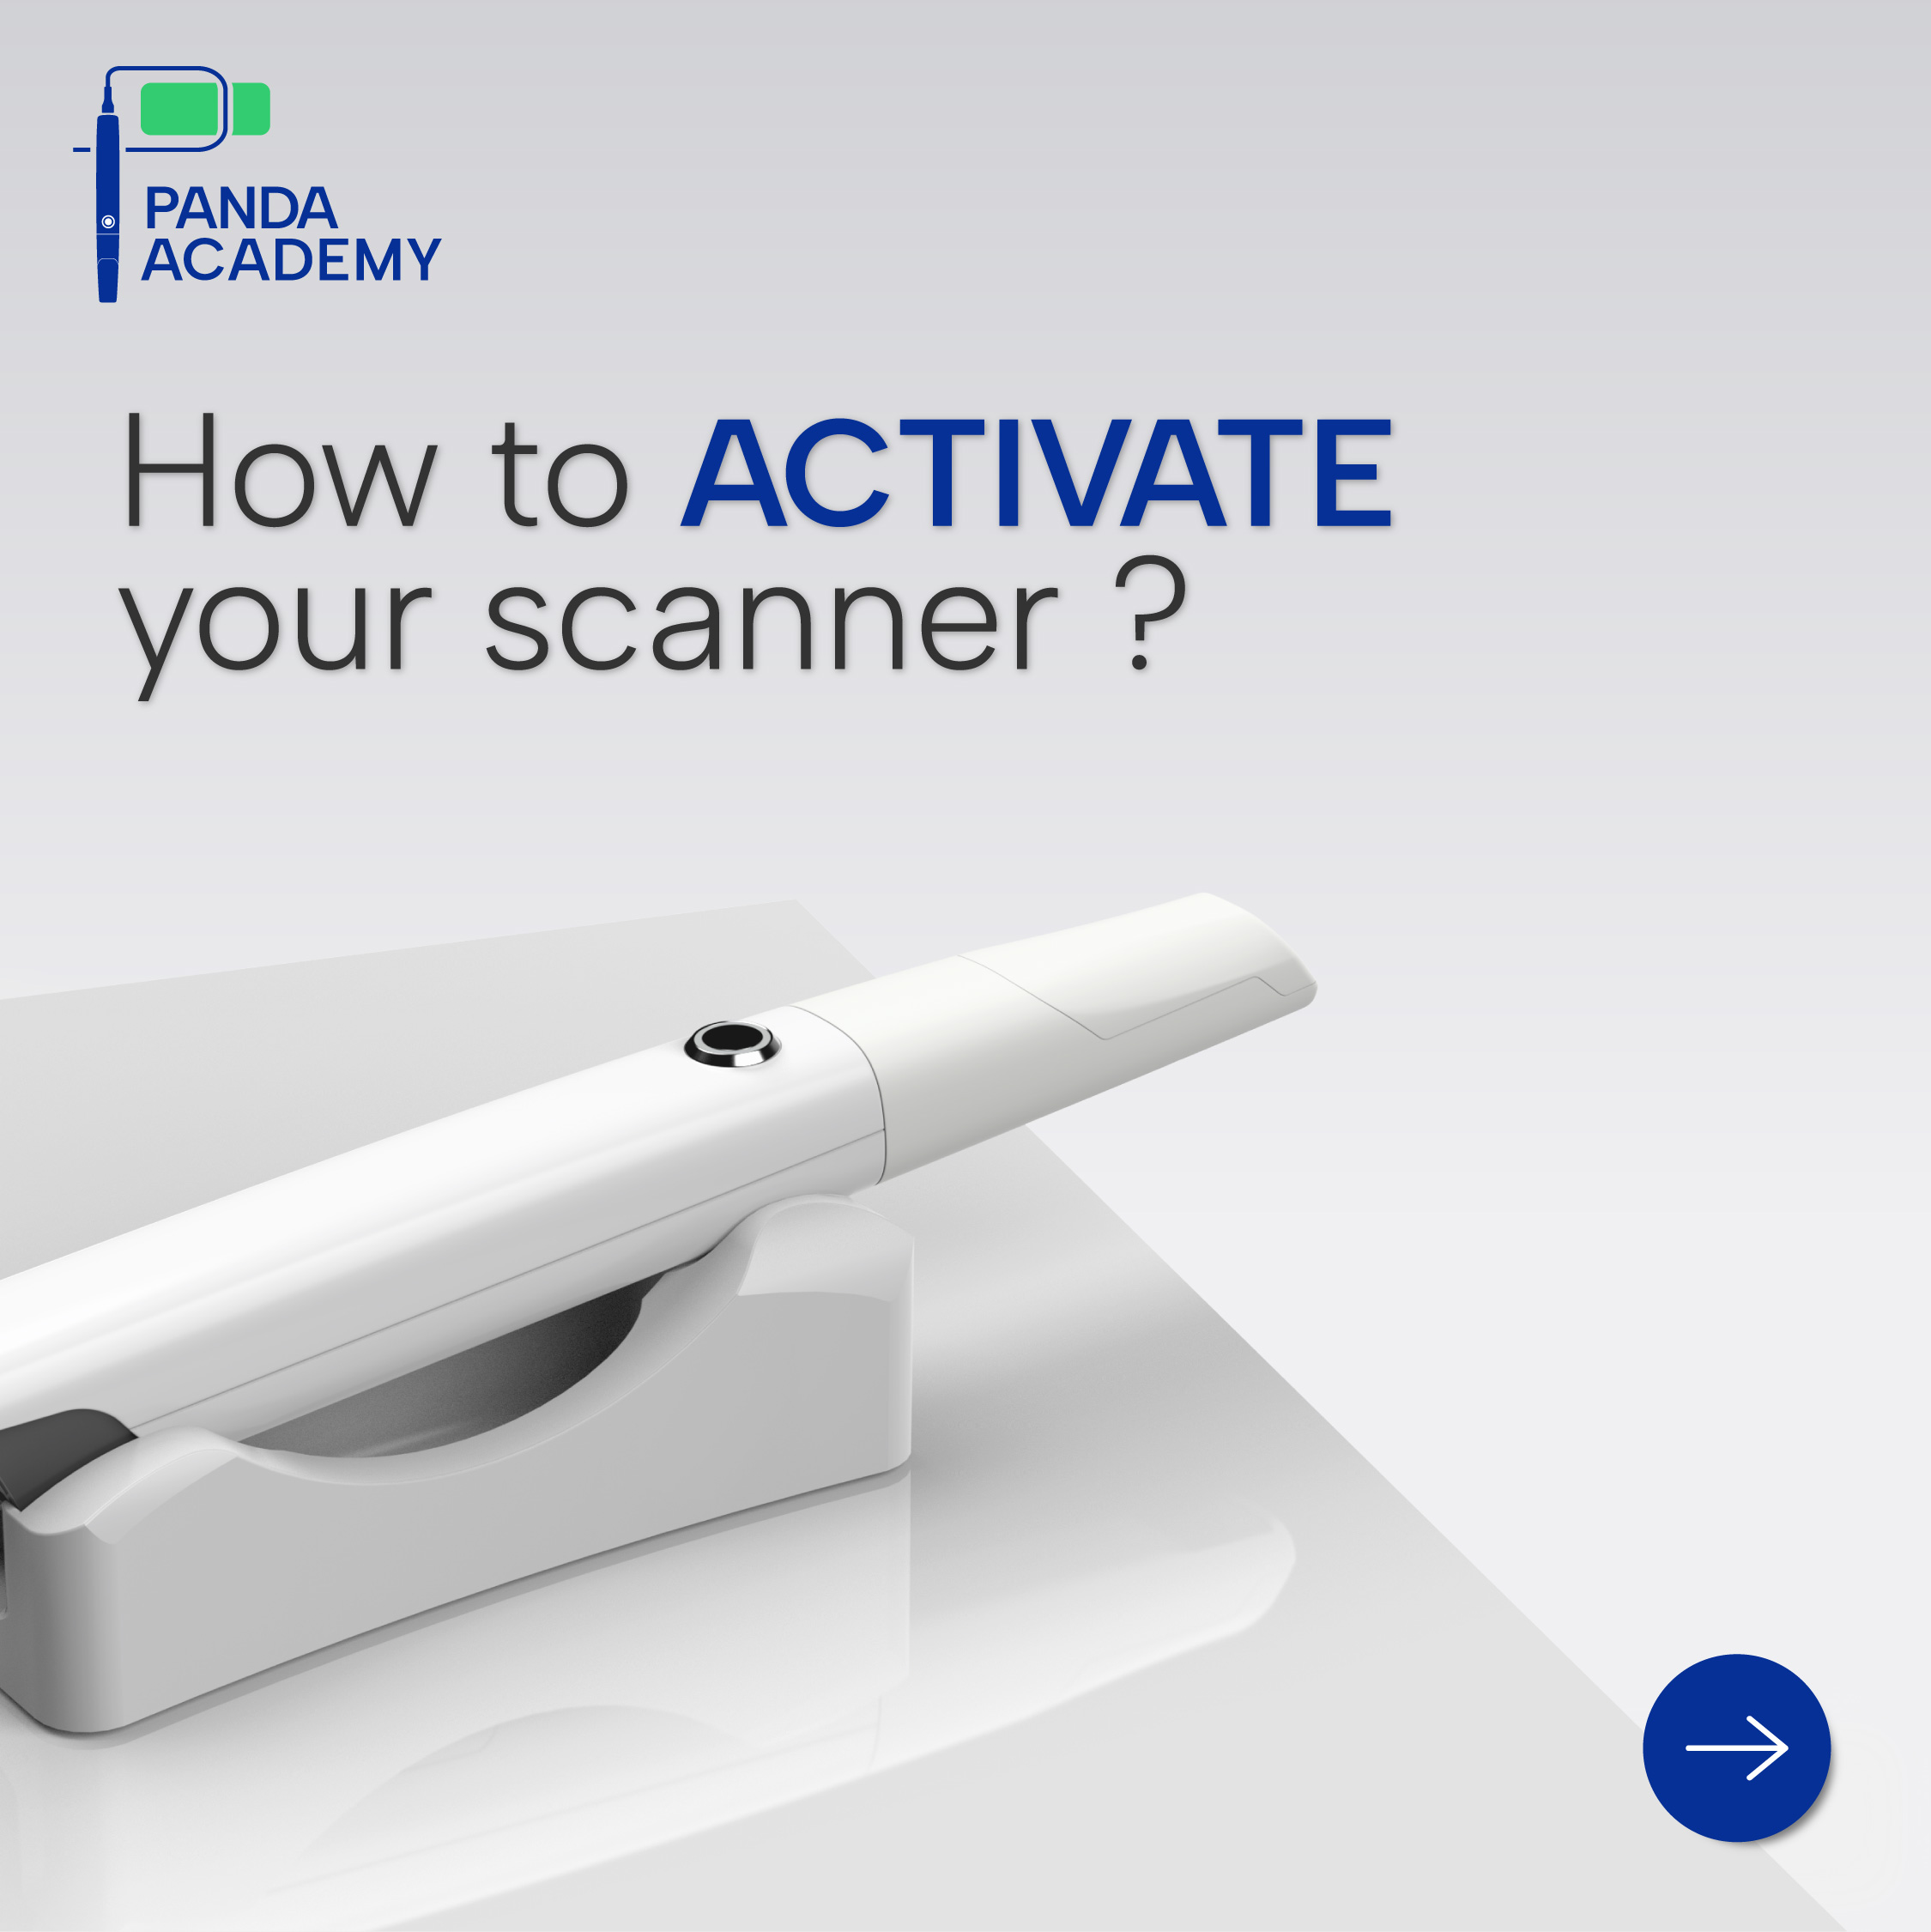 PANDA ACADEMY: How to Activate Your Scanner?